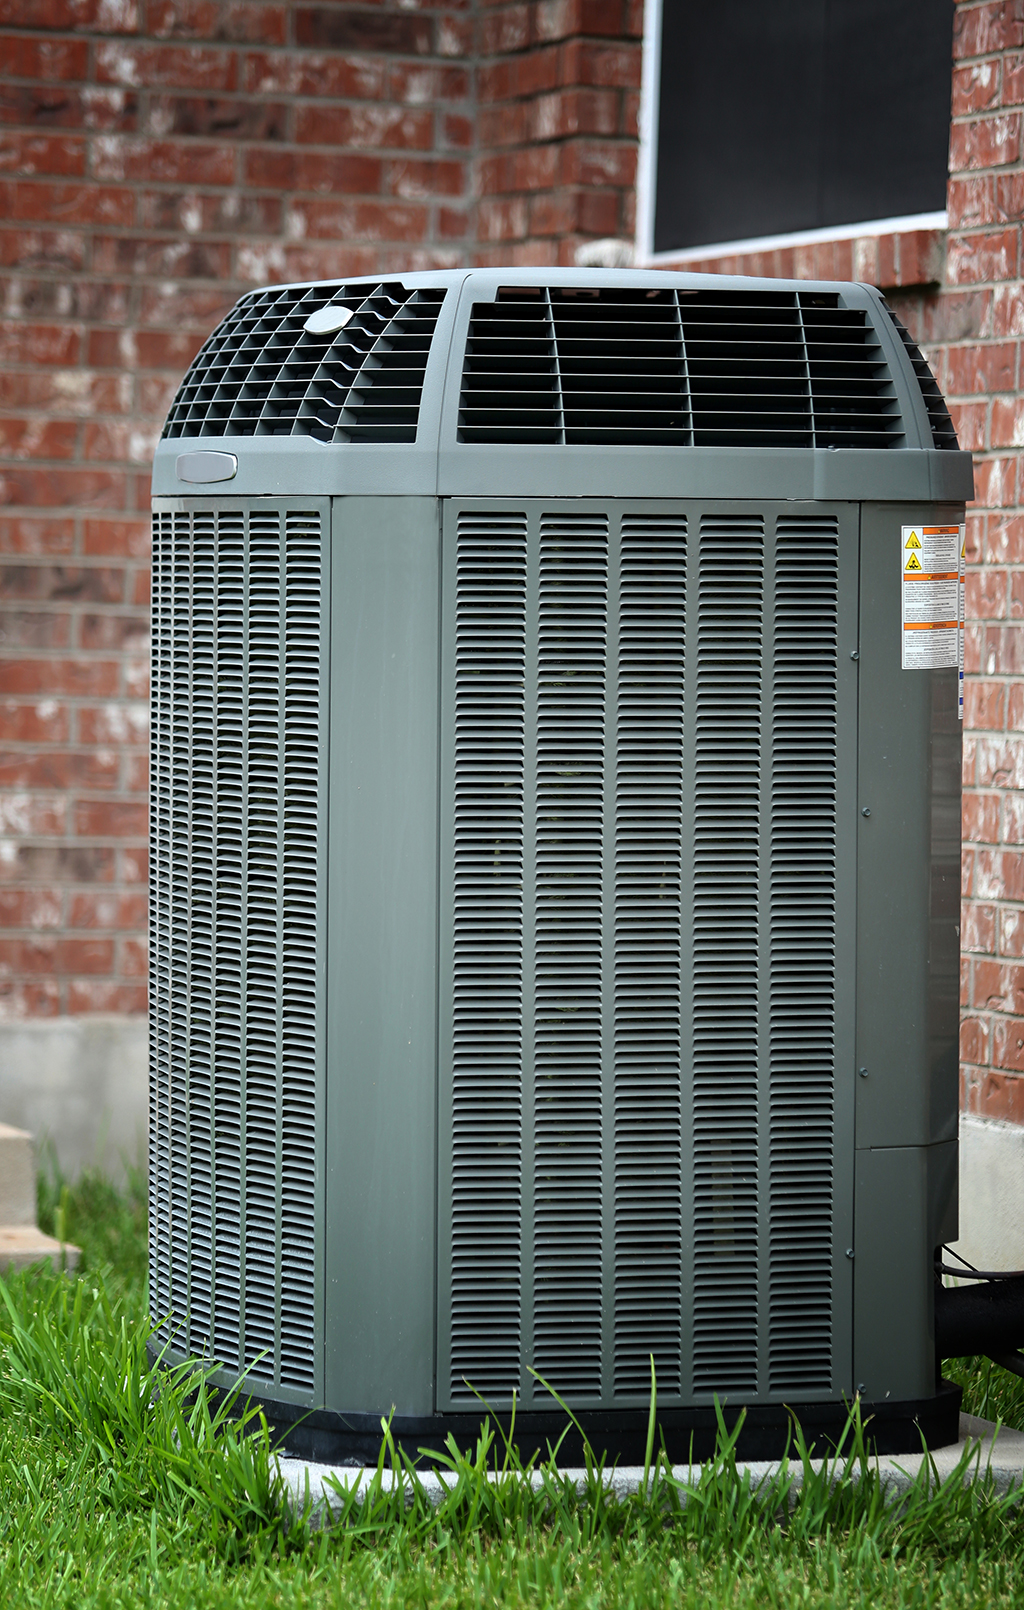 Air Conditioner Installation: Benefits Of Hiring A Professional Air Conditioning Company | Southlake, TX